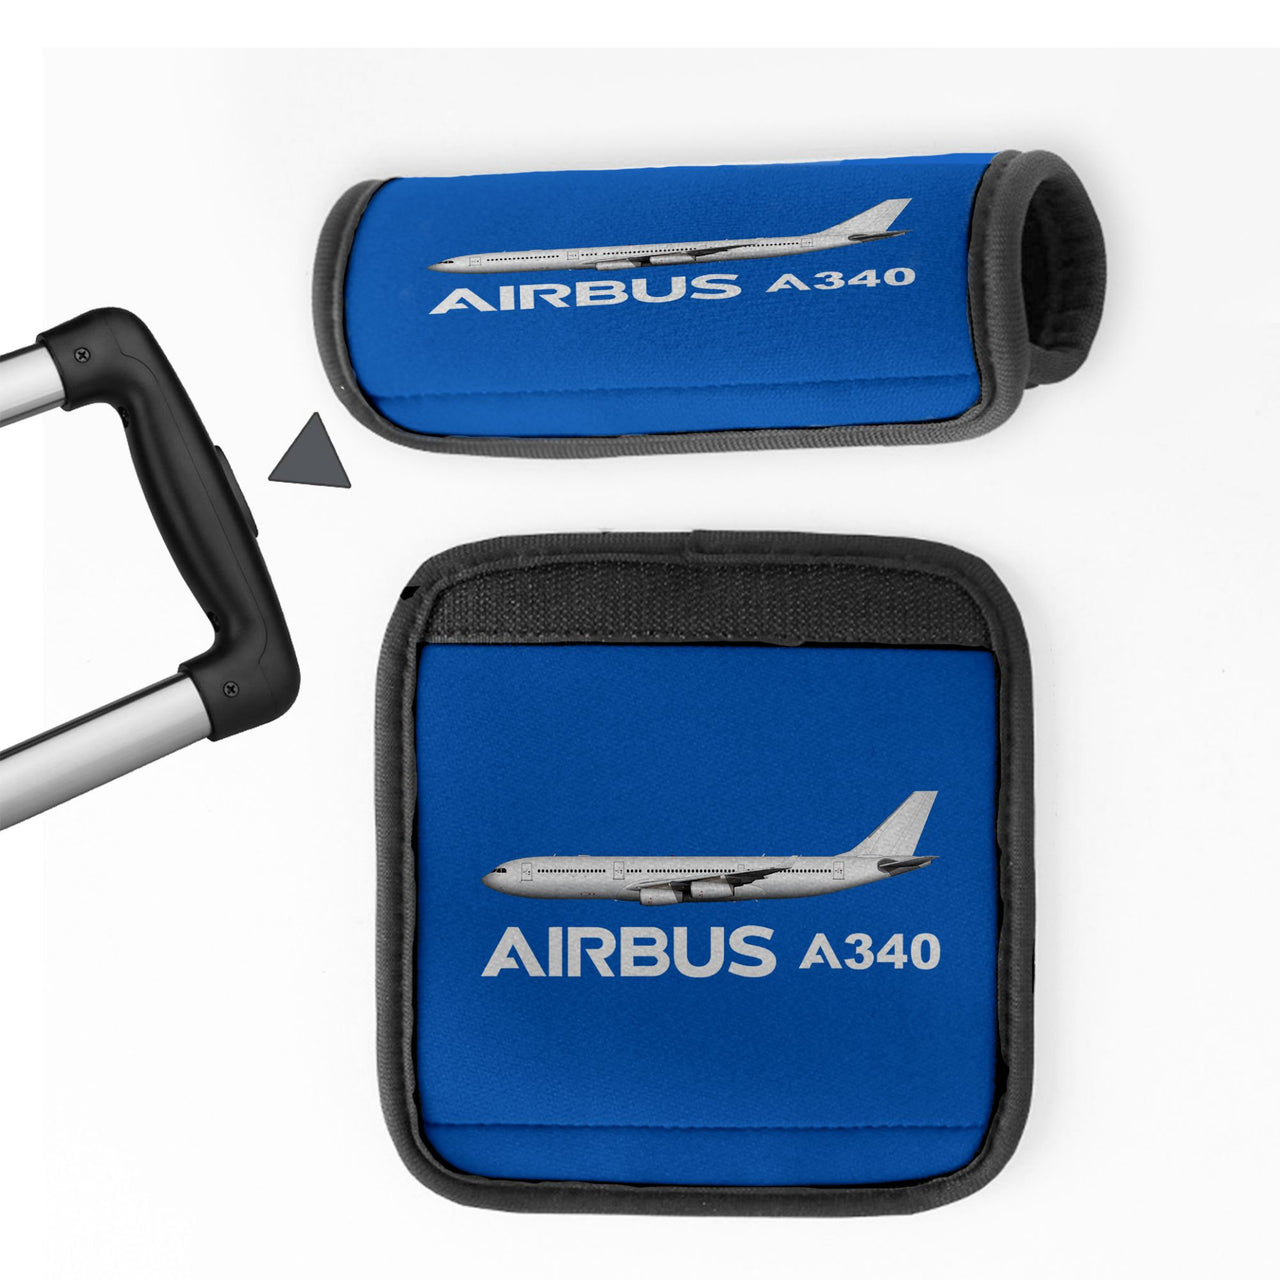 The Airbus A340 Designed Neoprene Luggage Handle Covers